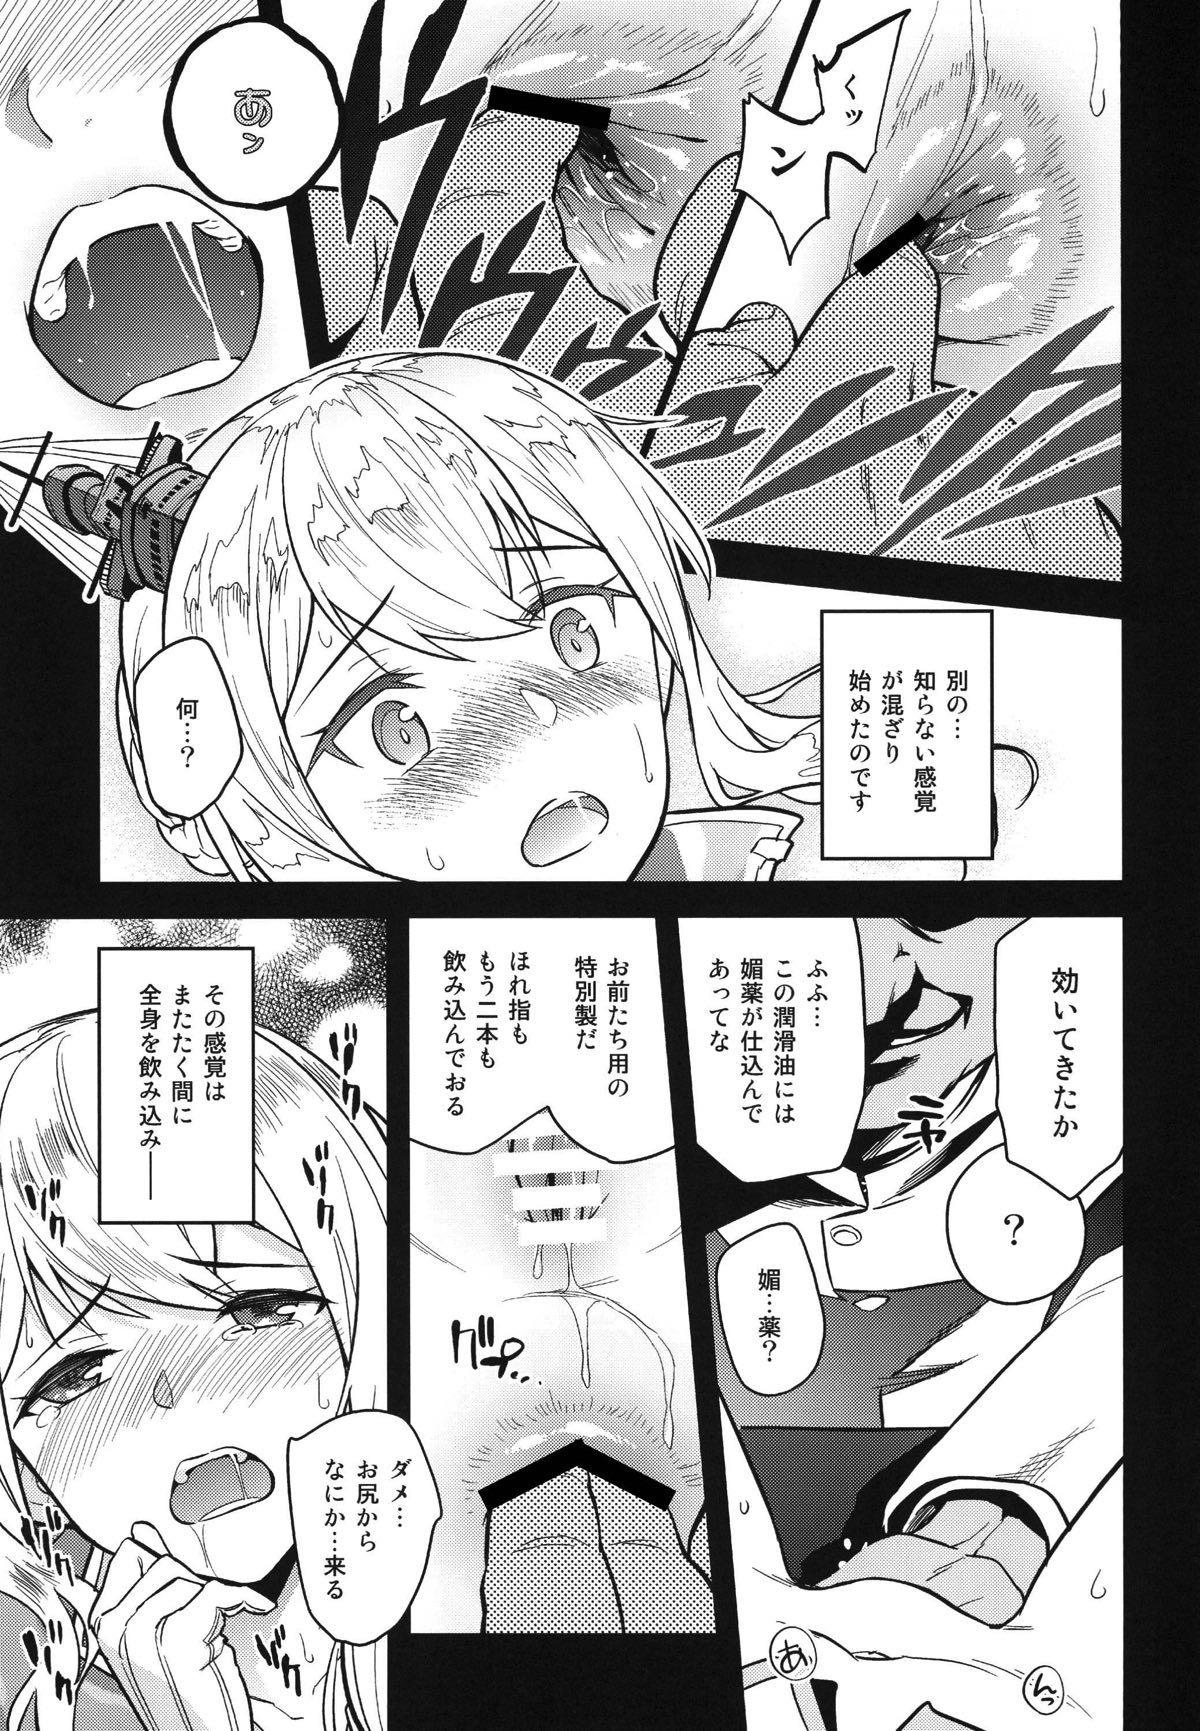 Lovers a§terisk - Azur lane Chica - Page 12